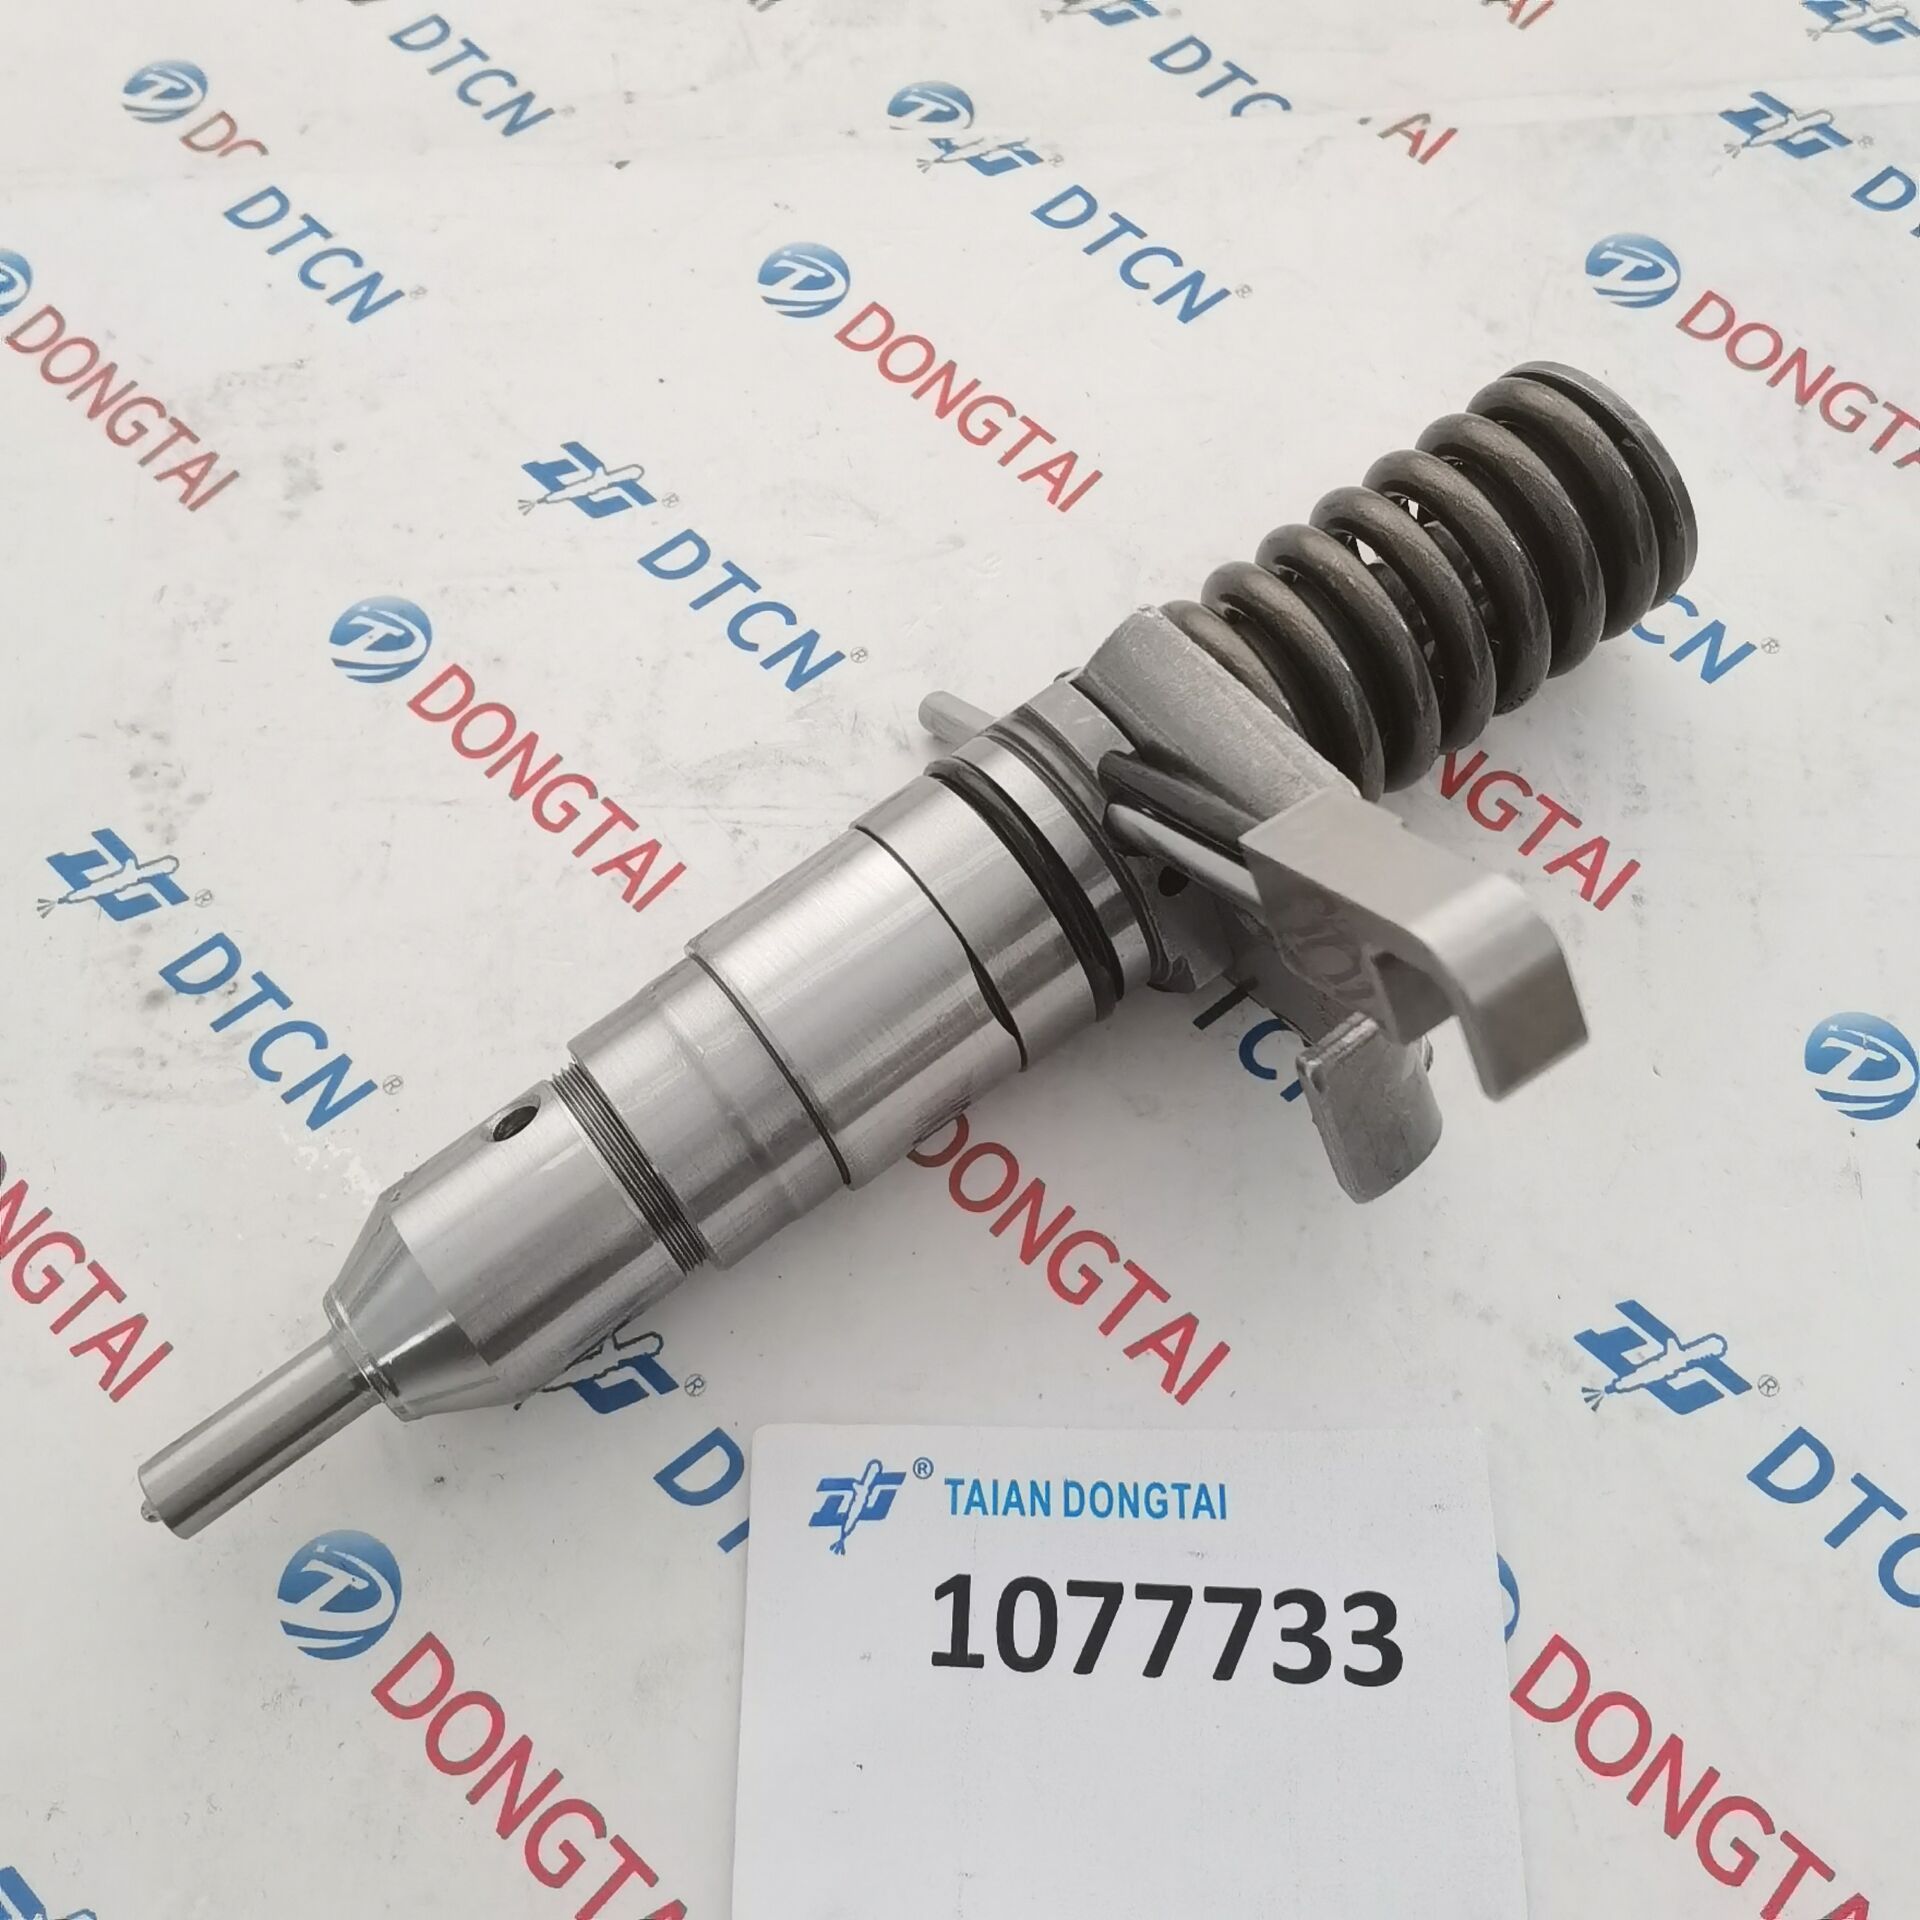 1077733 CAT Fuel Injector 1077733 ,107-7733 For 3116 Engine